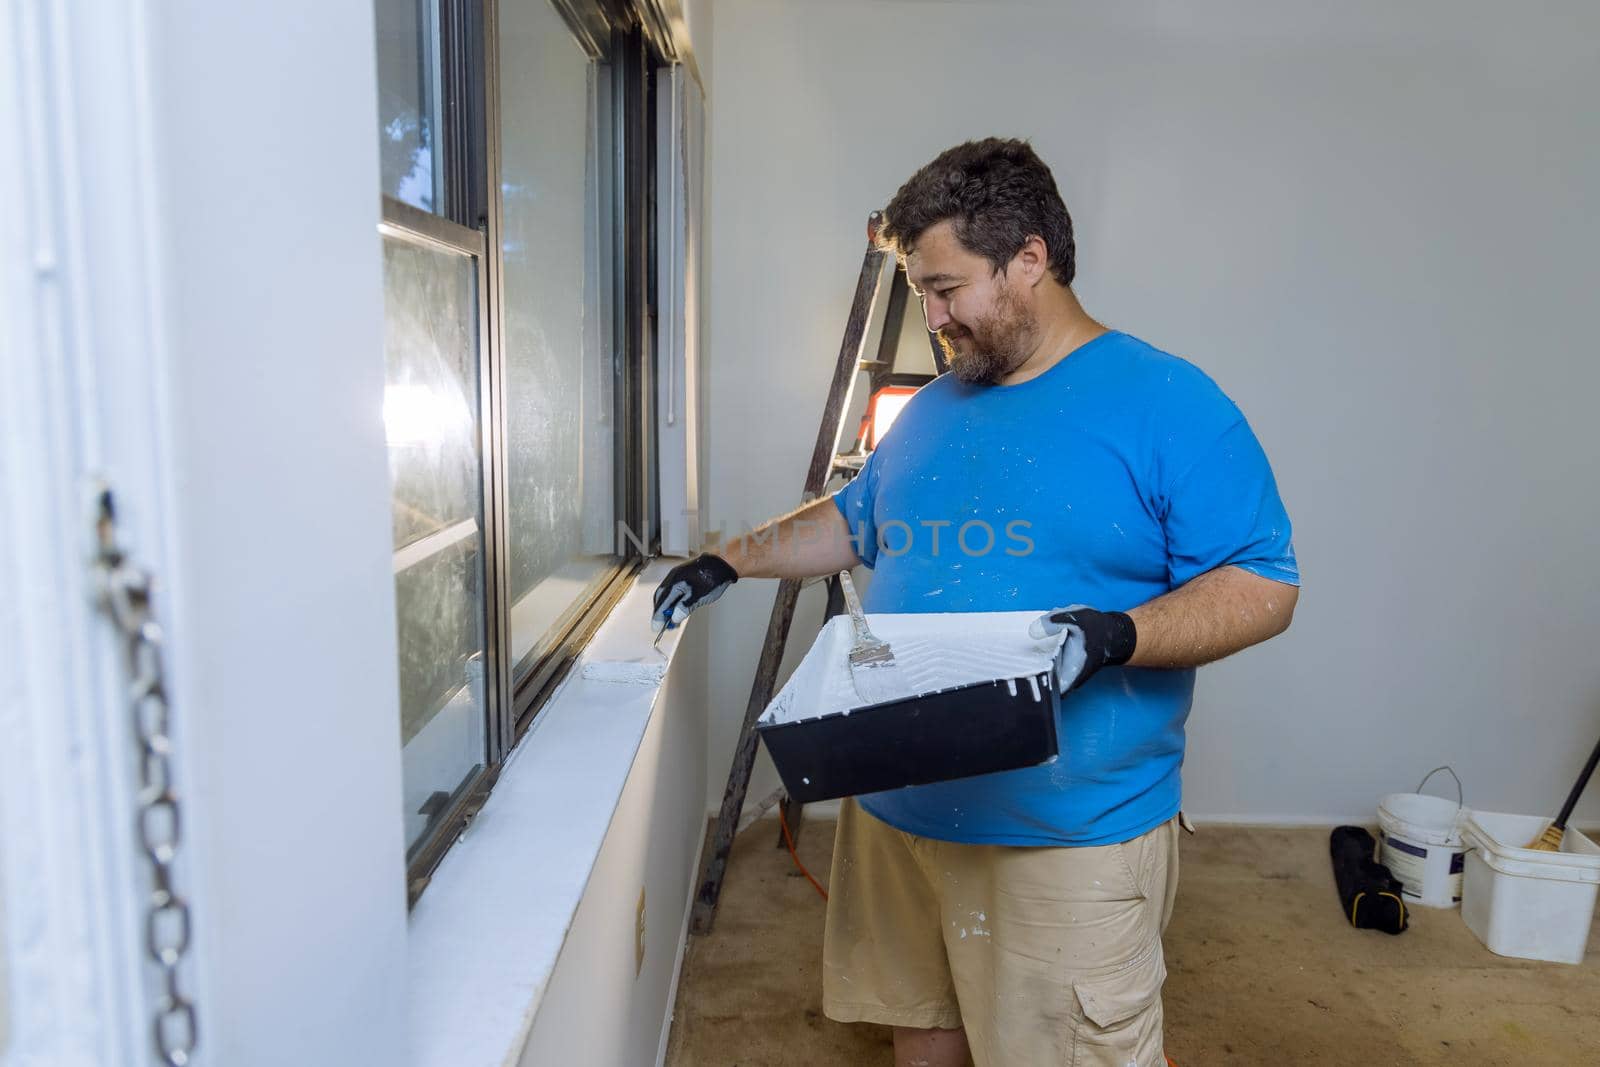 Handyman paints a window molding frame with a paint roller at home renovation